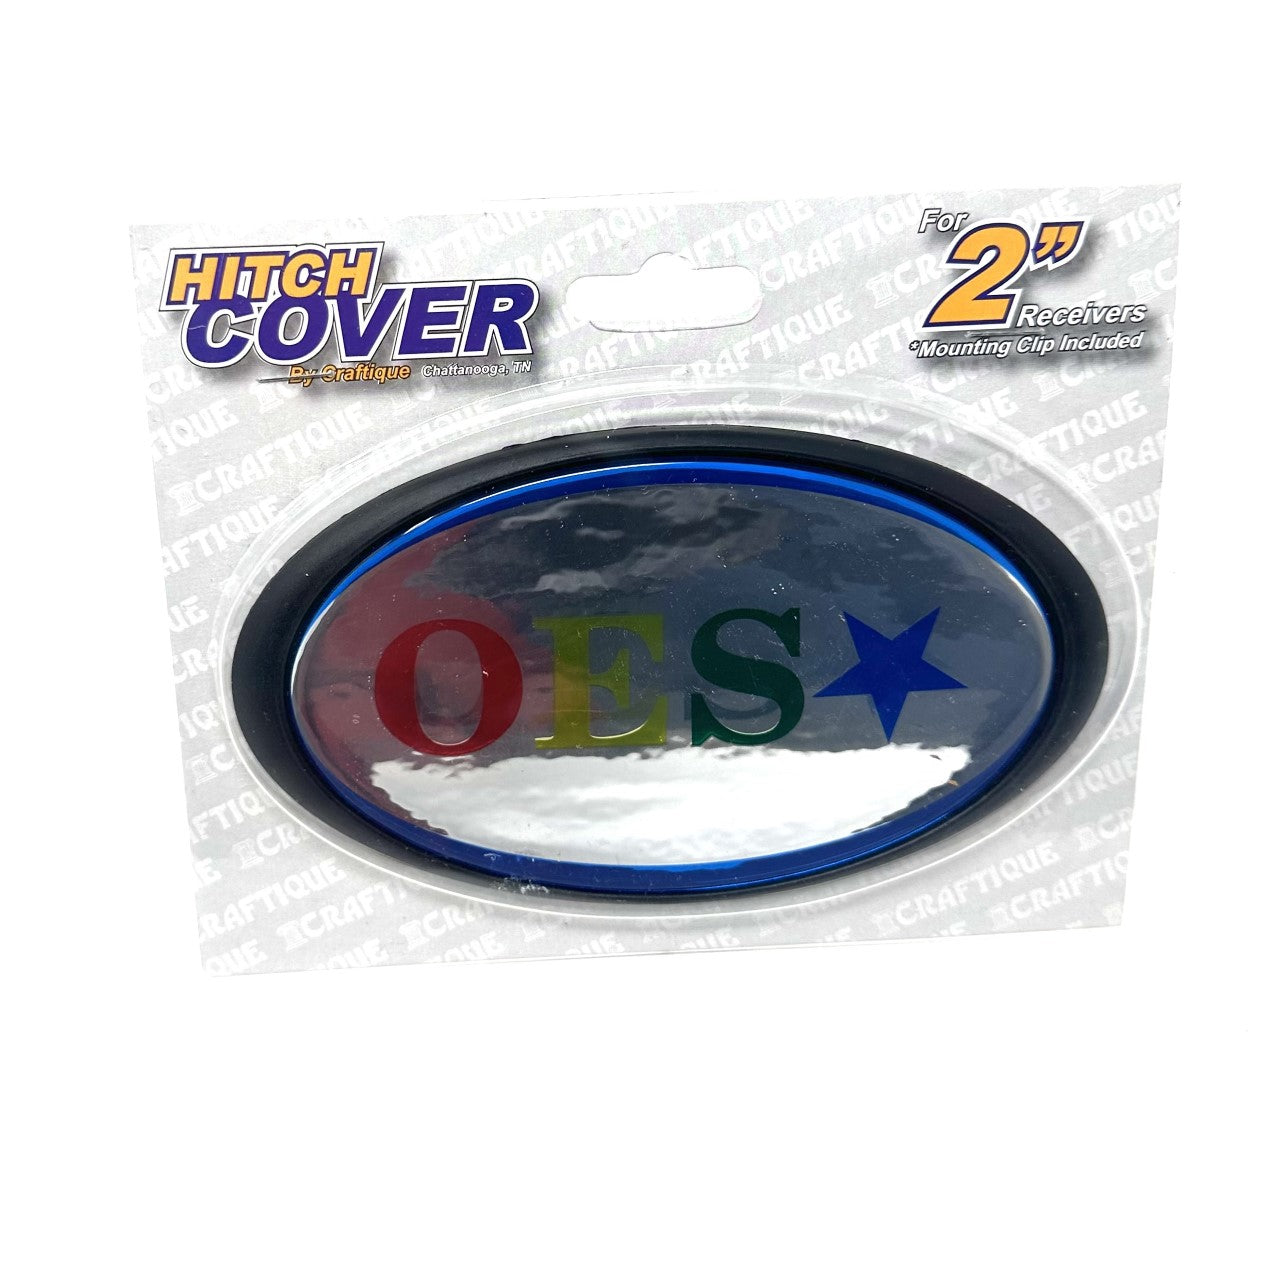 Order of Eastern Star Car Hitch Cover